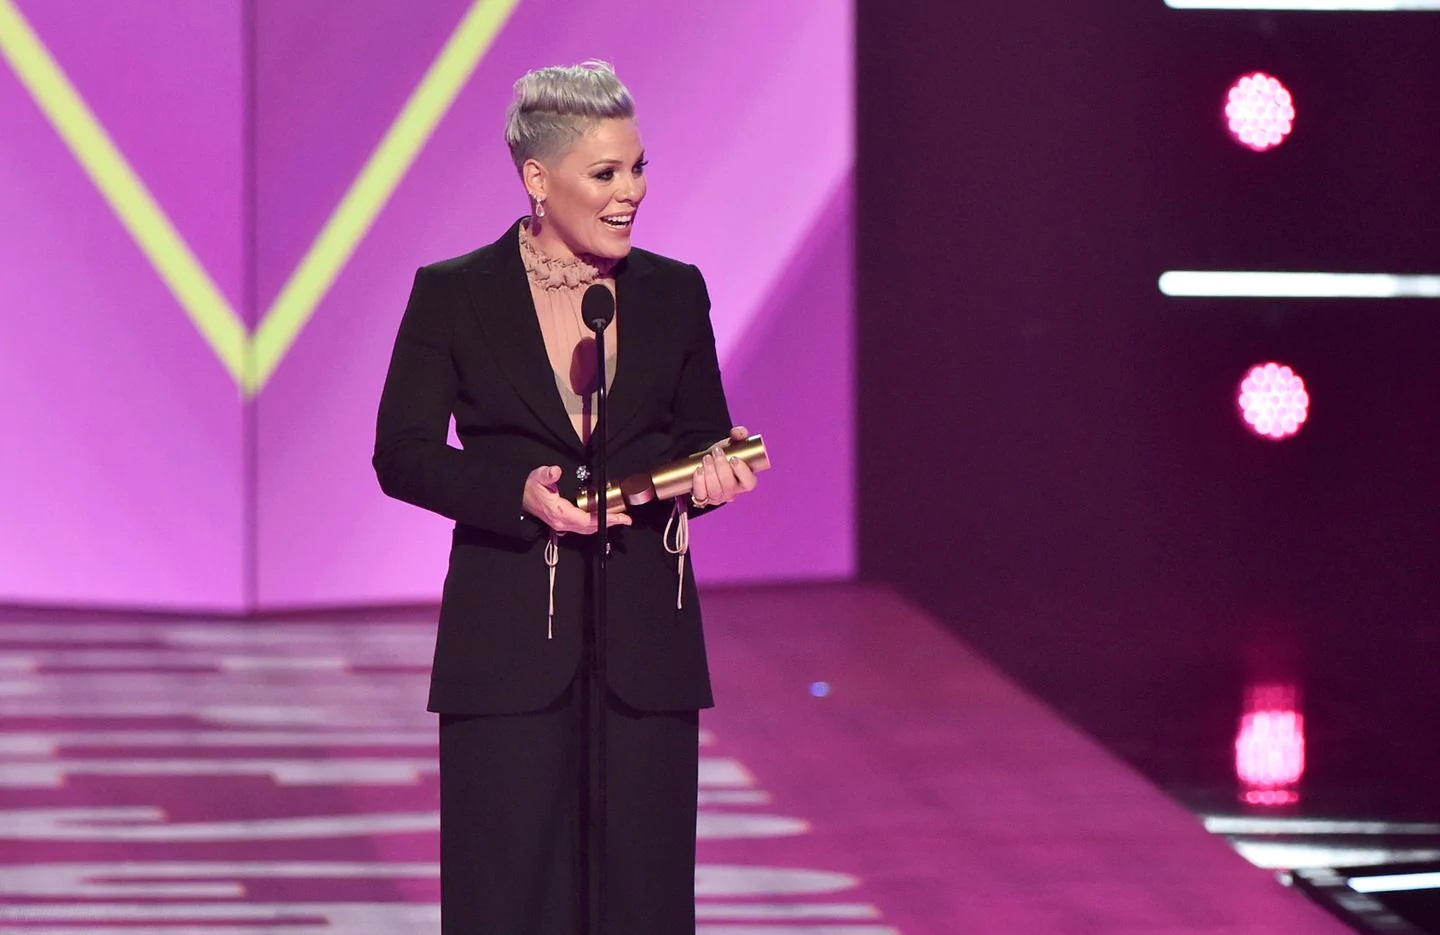 People’s Choice Awards: The 5 most noteworthy celebrity quotes, from Kevin Hart to Jennifer Aniston